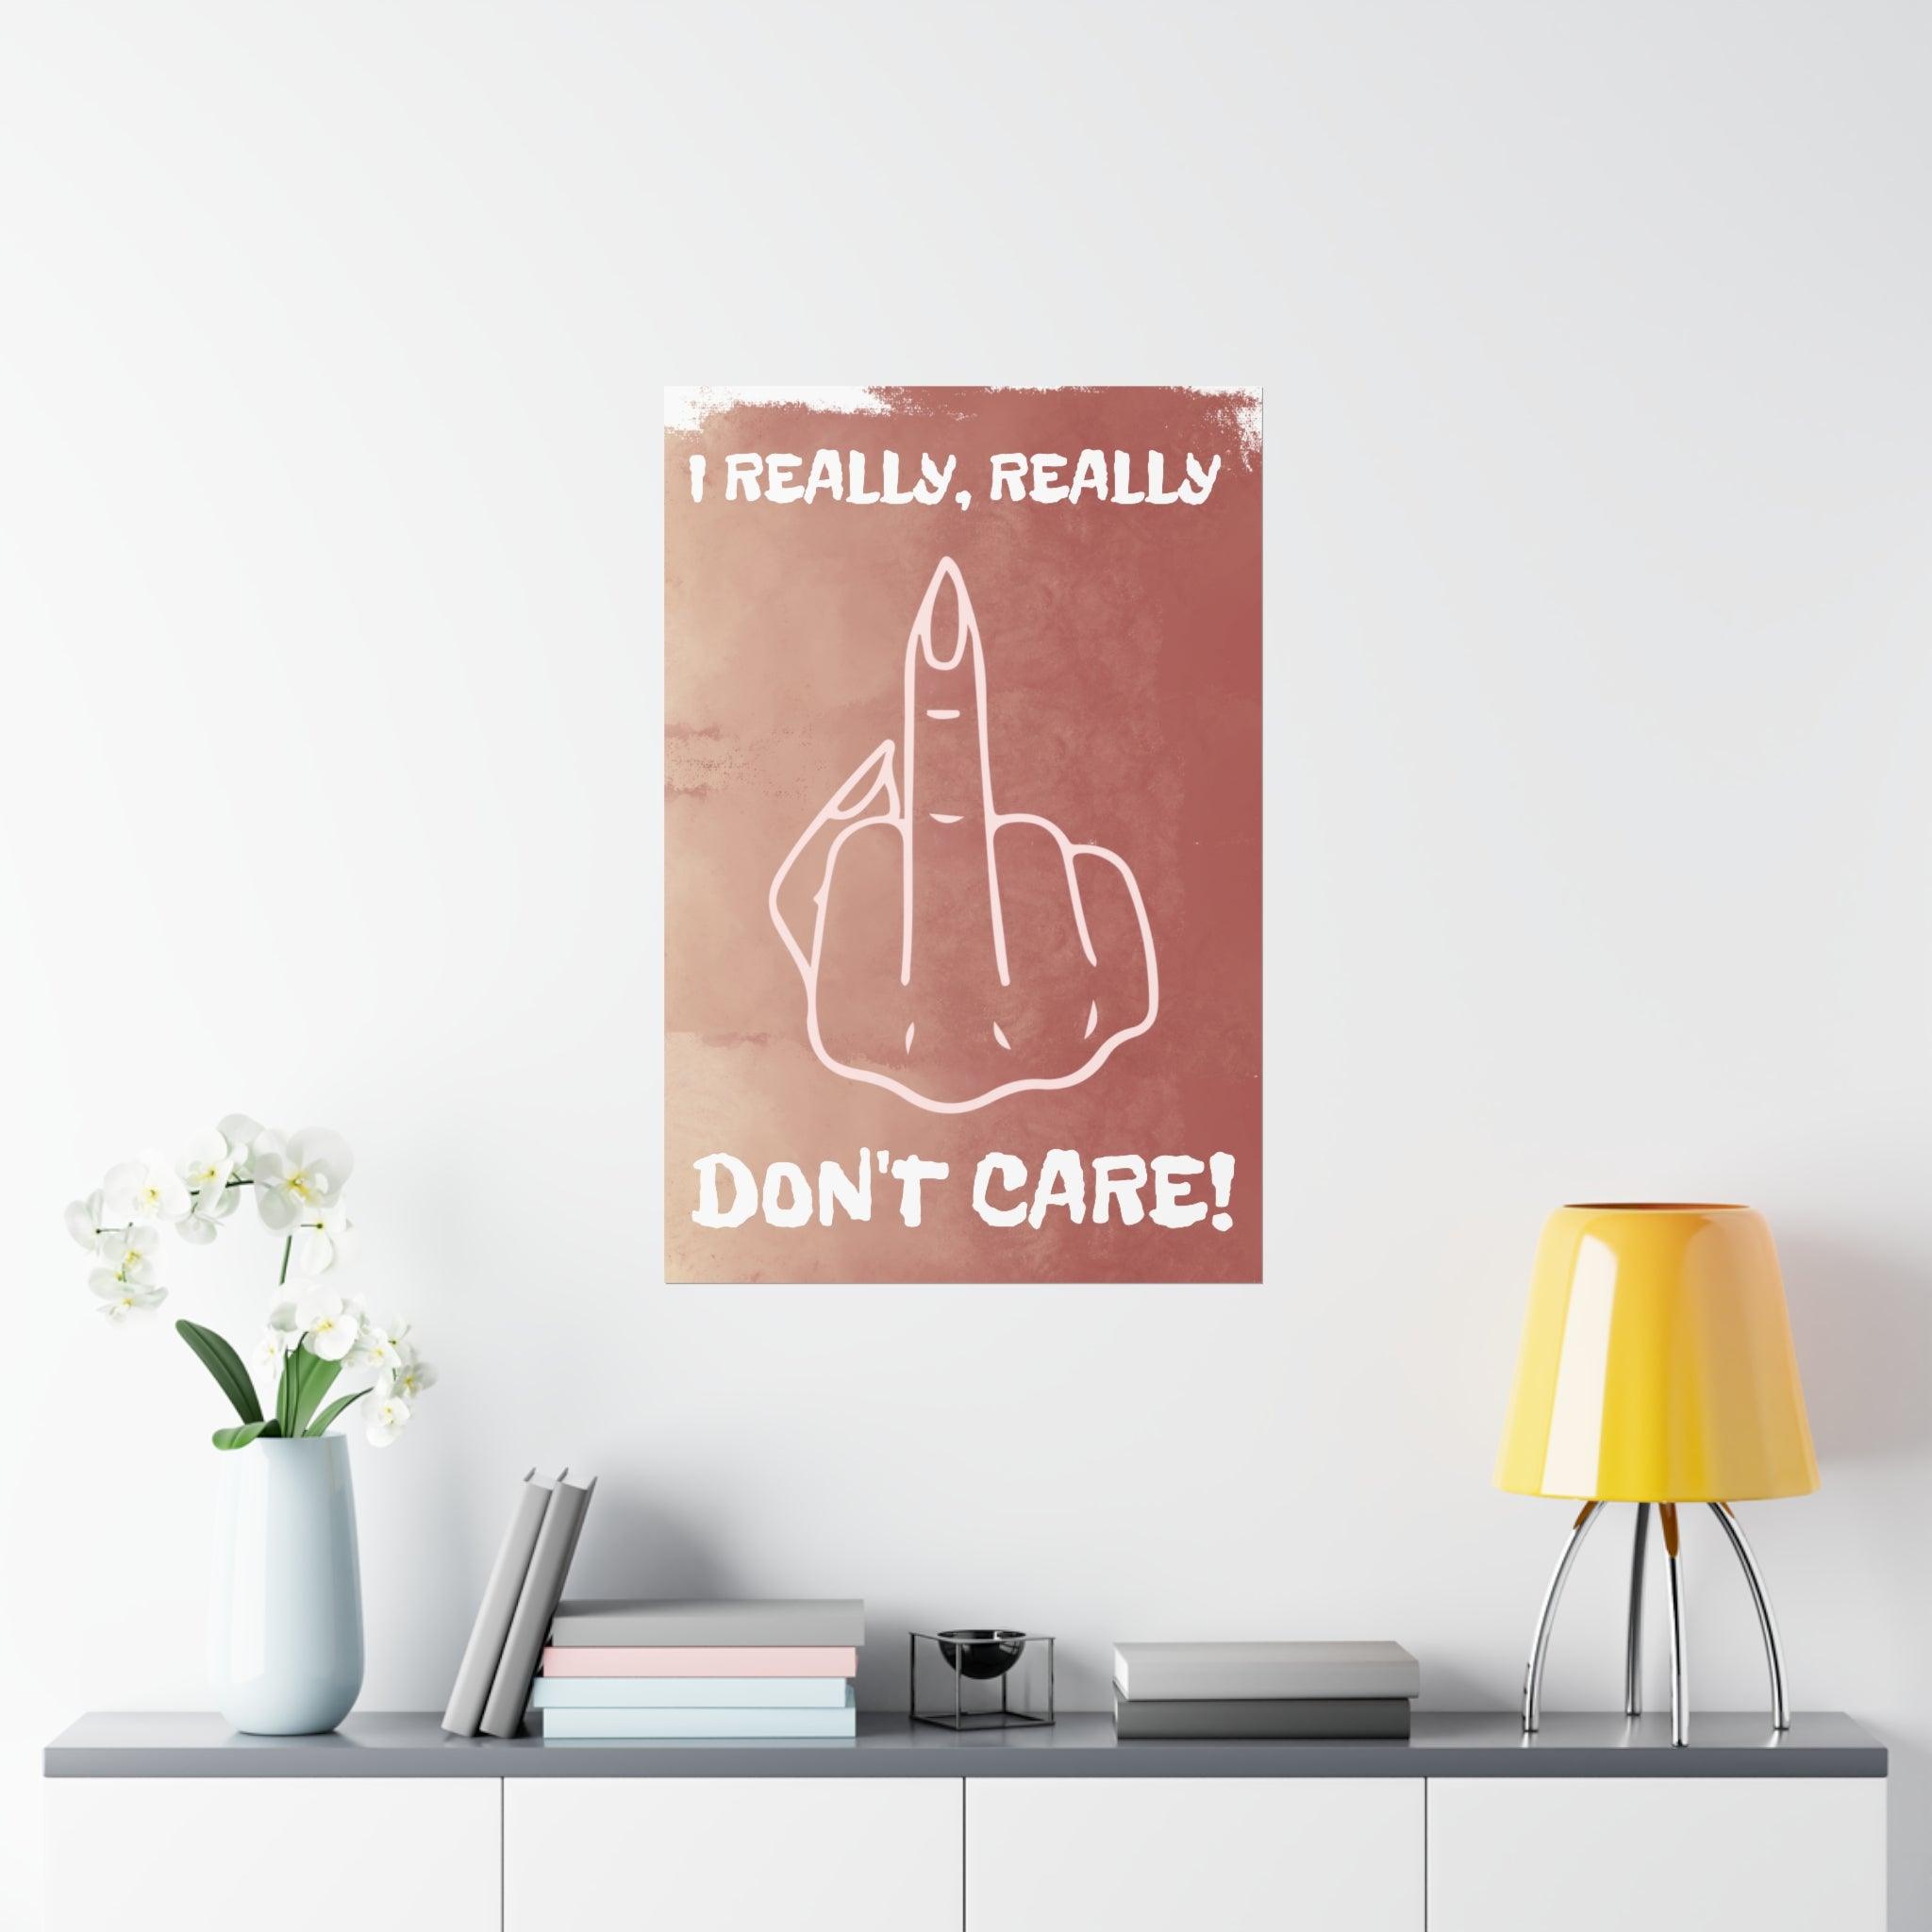 Poster | Lembrete  REALLY, REALLY DON'T CARE - My dear oraculo store